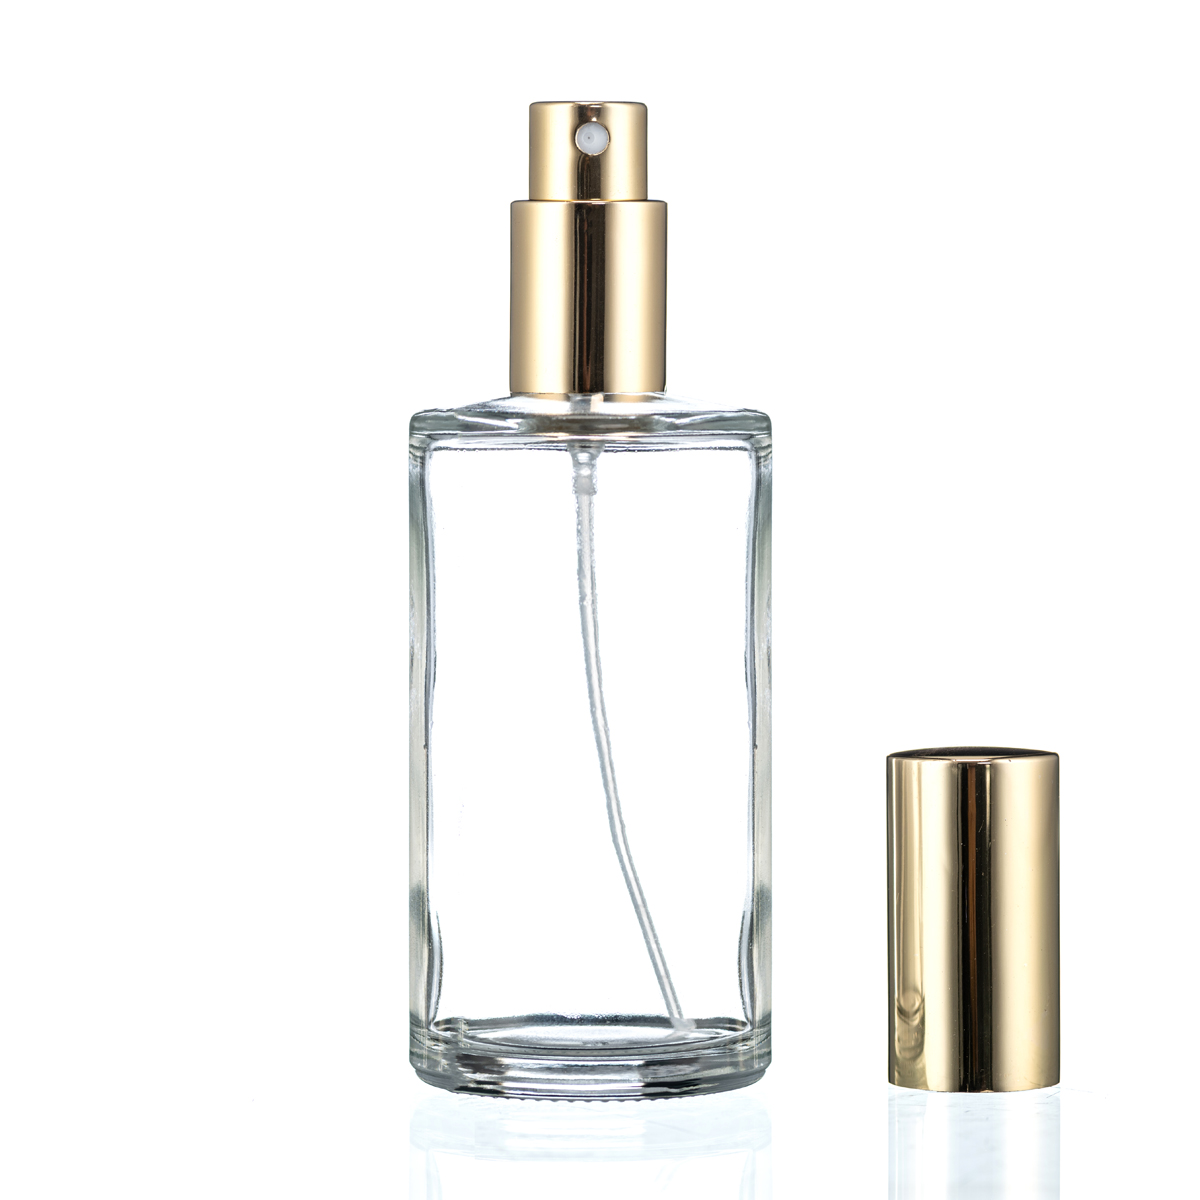 What is a normal perfume bottle size?